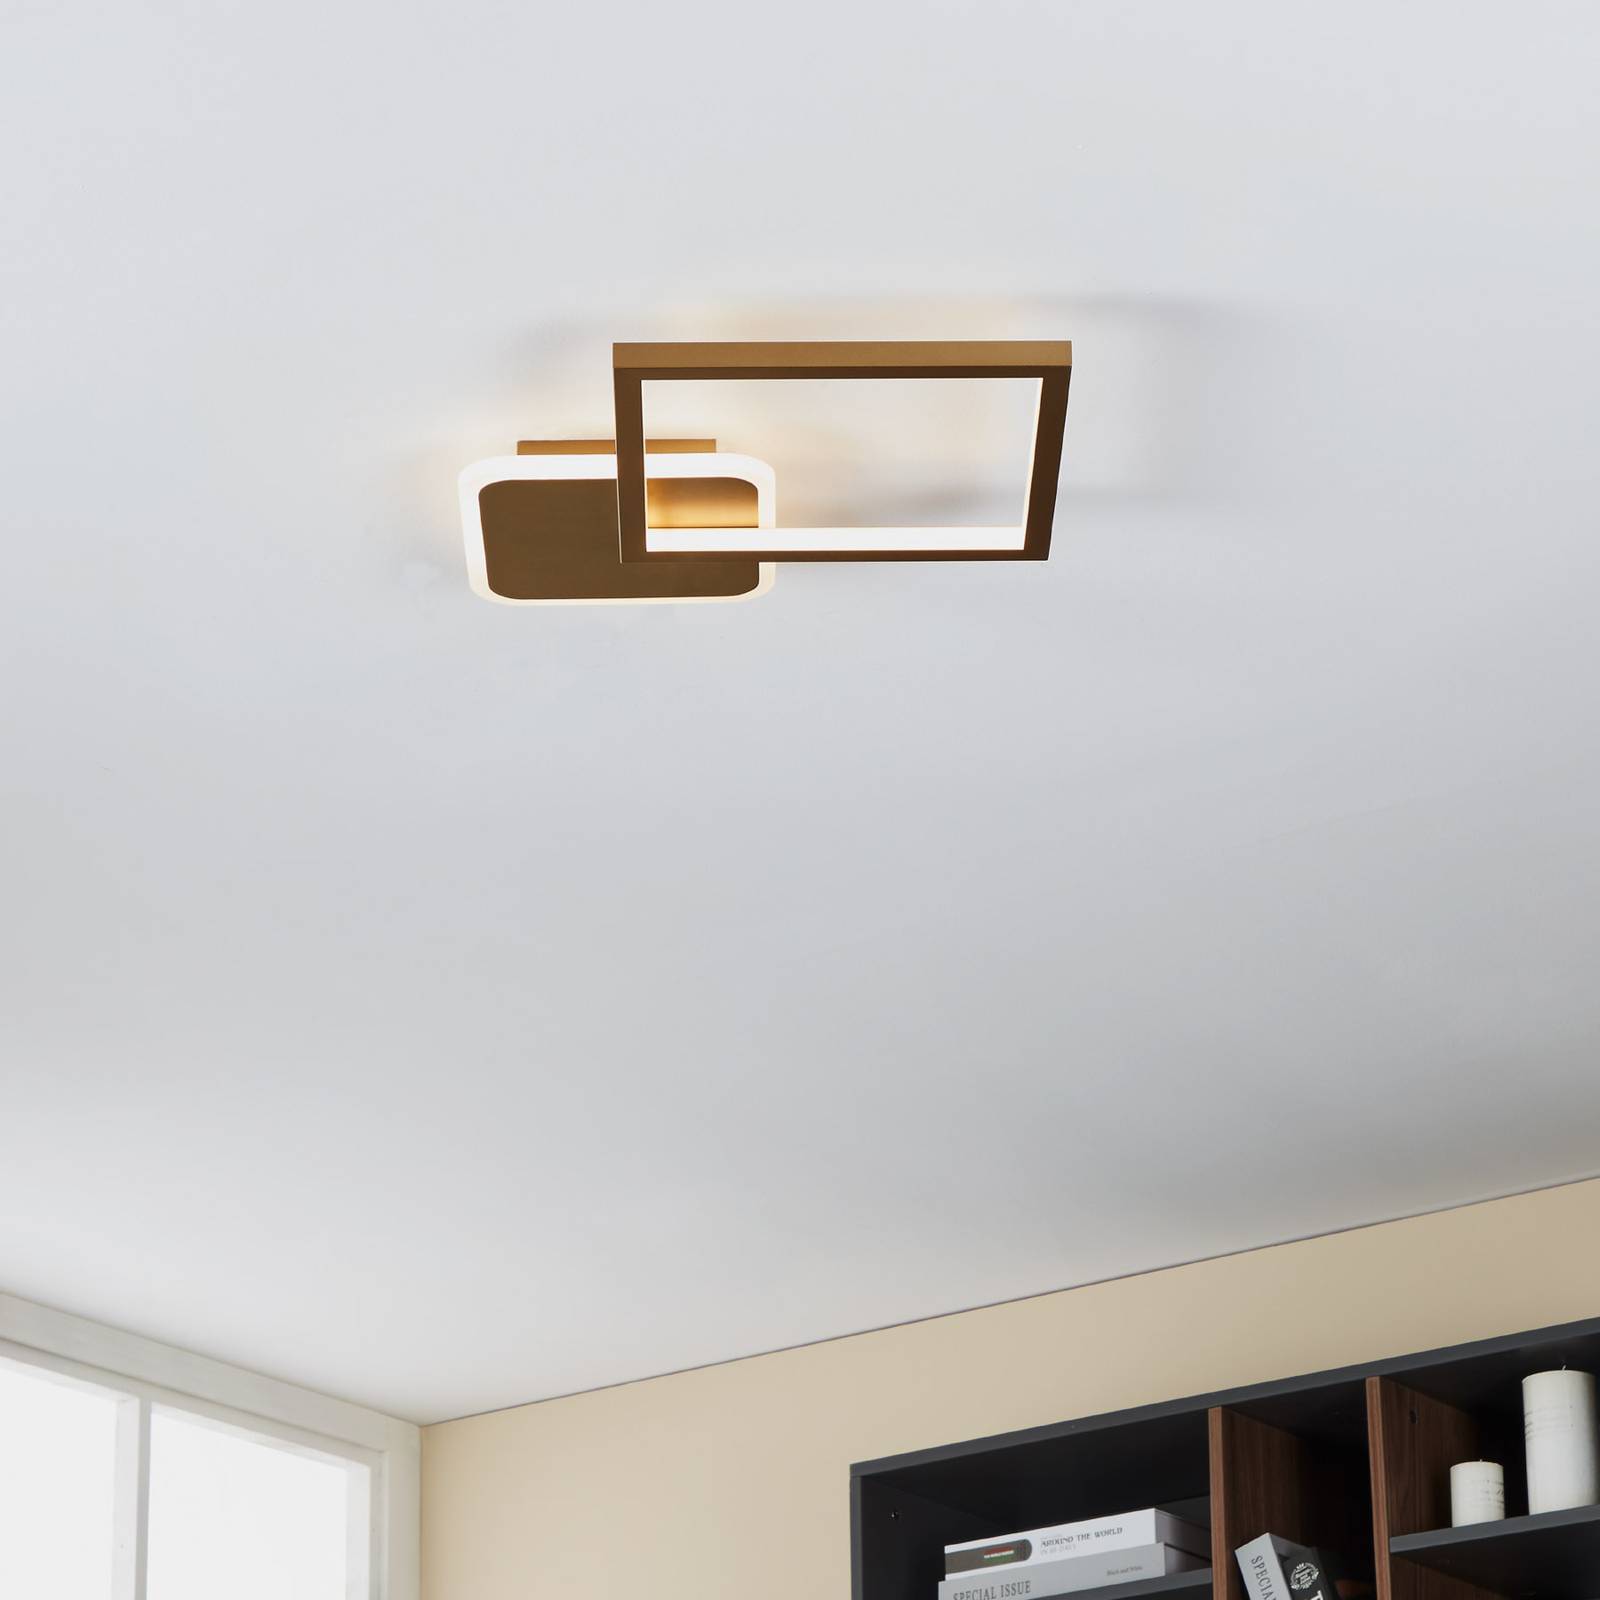 Photos - Chandelier / Lamp EGLO LED ceiling light Gafares with remote control angular gold 